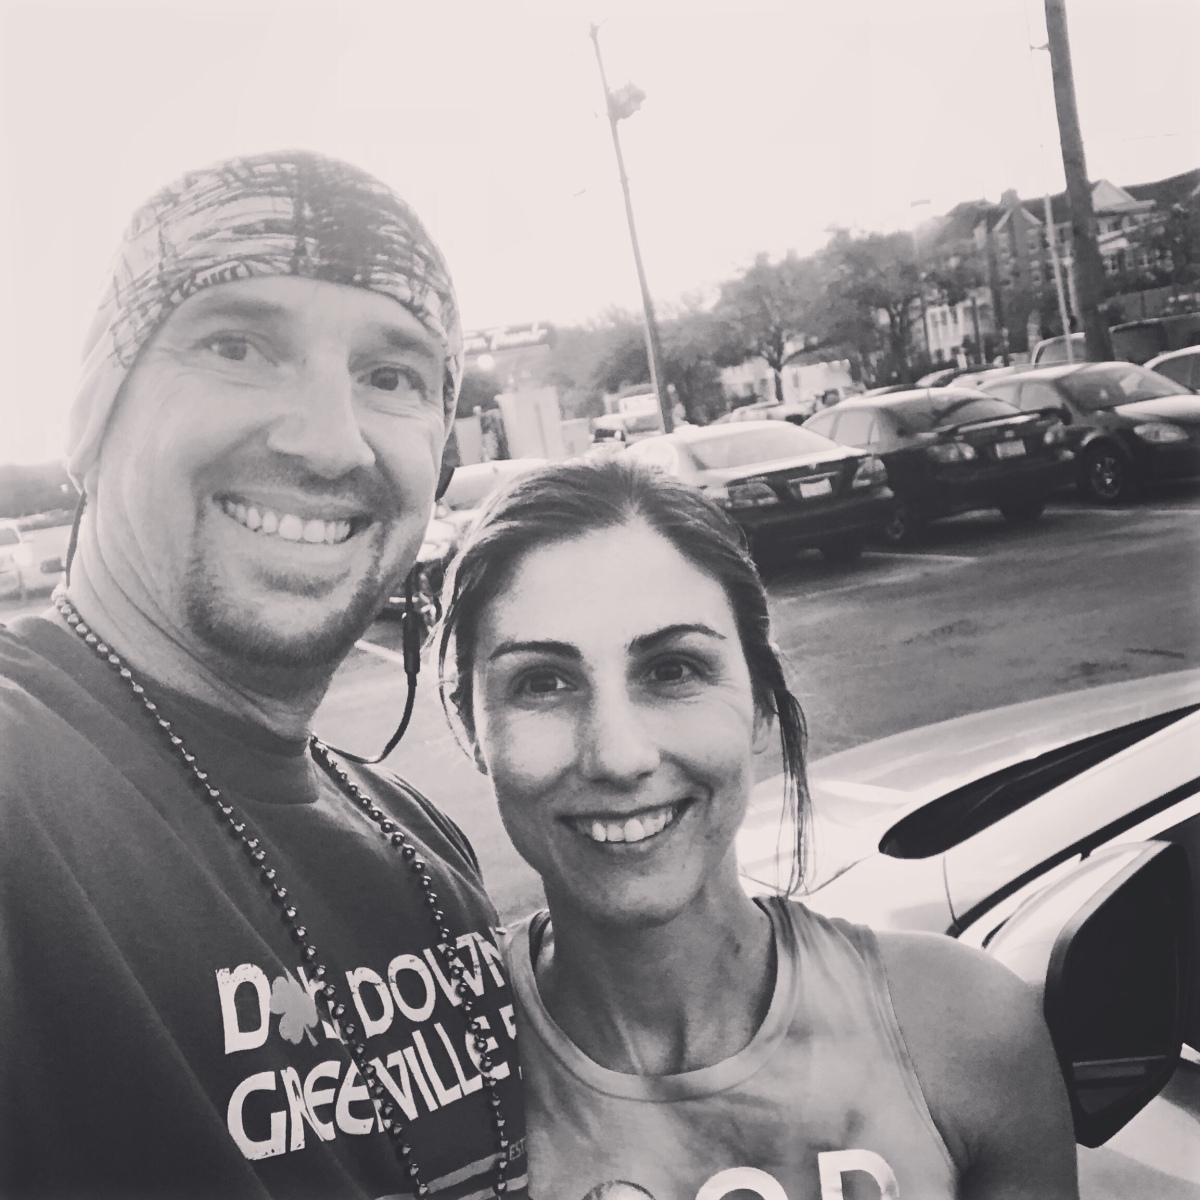 St. Paddy’s Day Dash Down Greenville 5k 2018